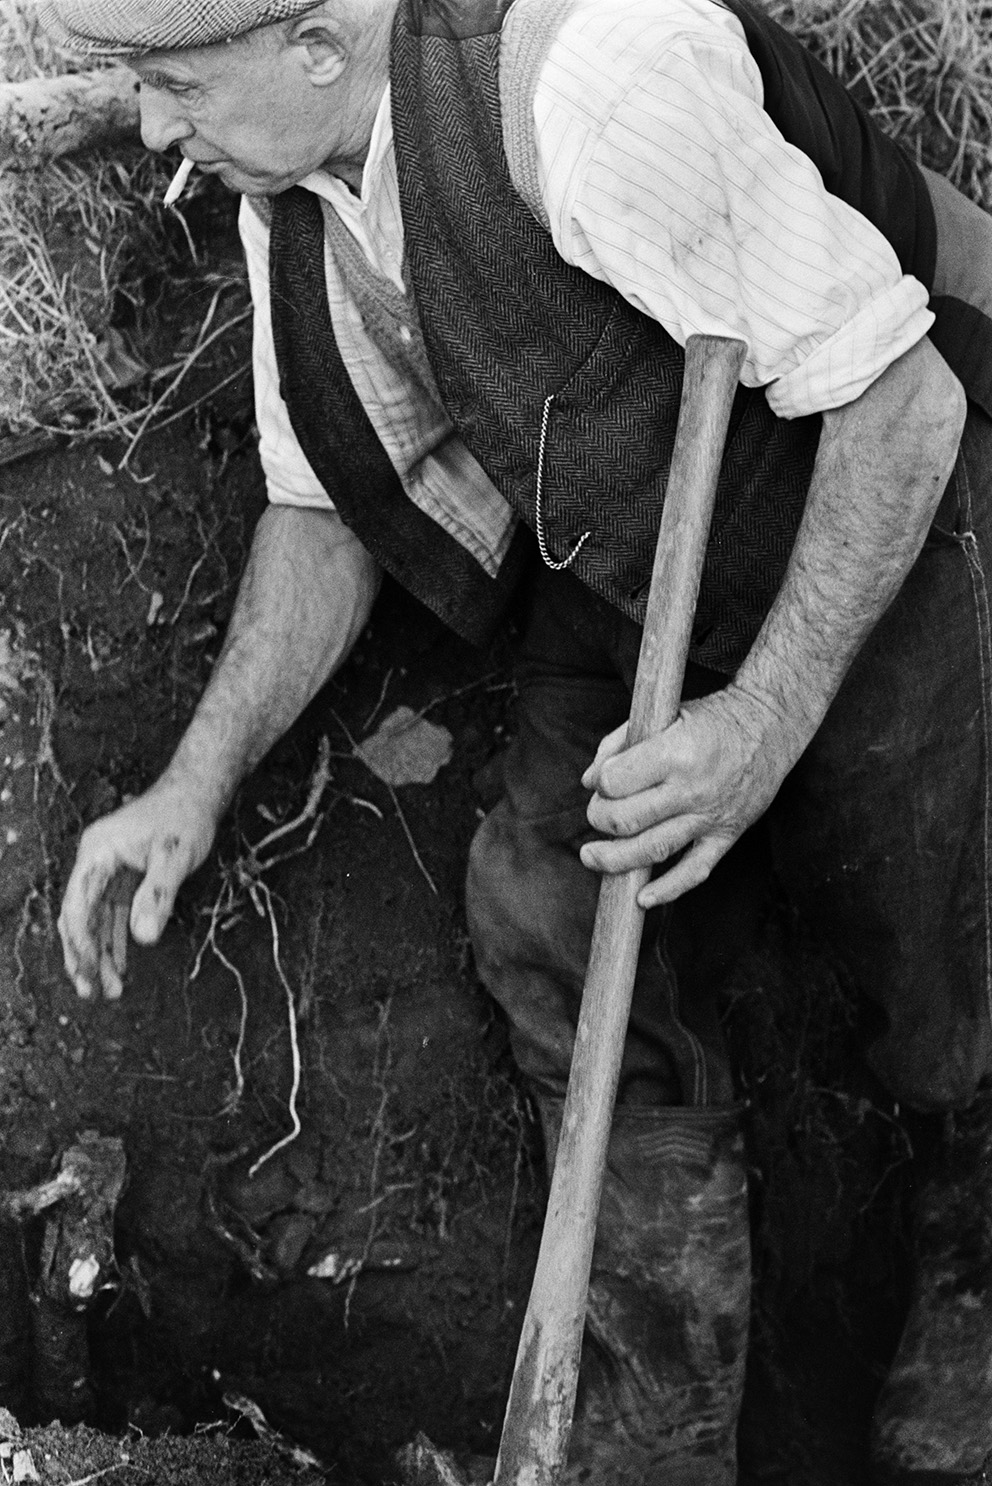 Tom Hooper using a shovel for clatting a hedge at Mill Road Farm, Beaford. He is building up the hedge bank with turf. He is smoking a cigarette and a pocket watch chin can be seen on his waistcoat. The farm was also known as Jeffrys.